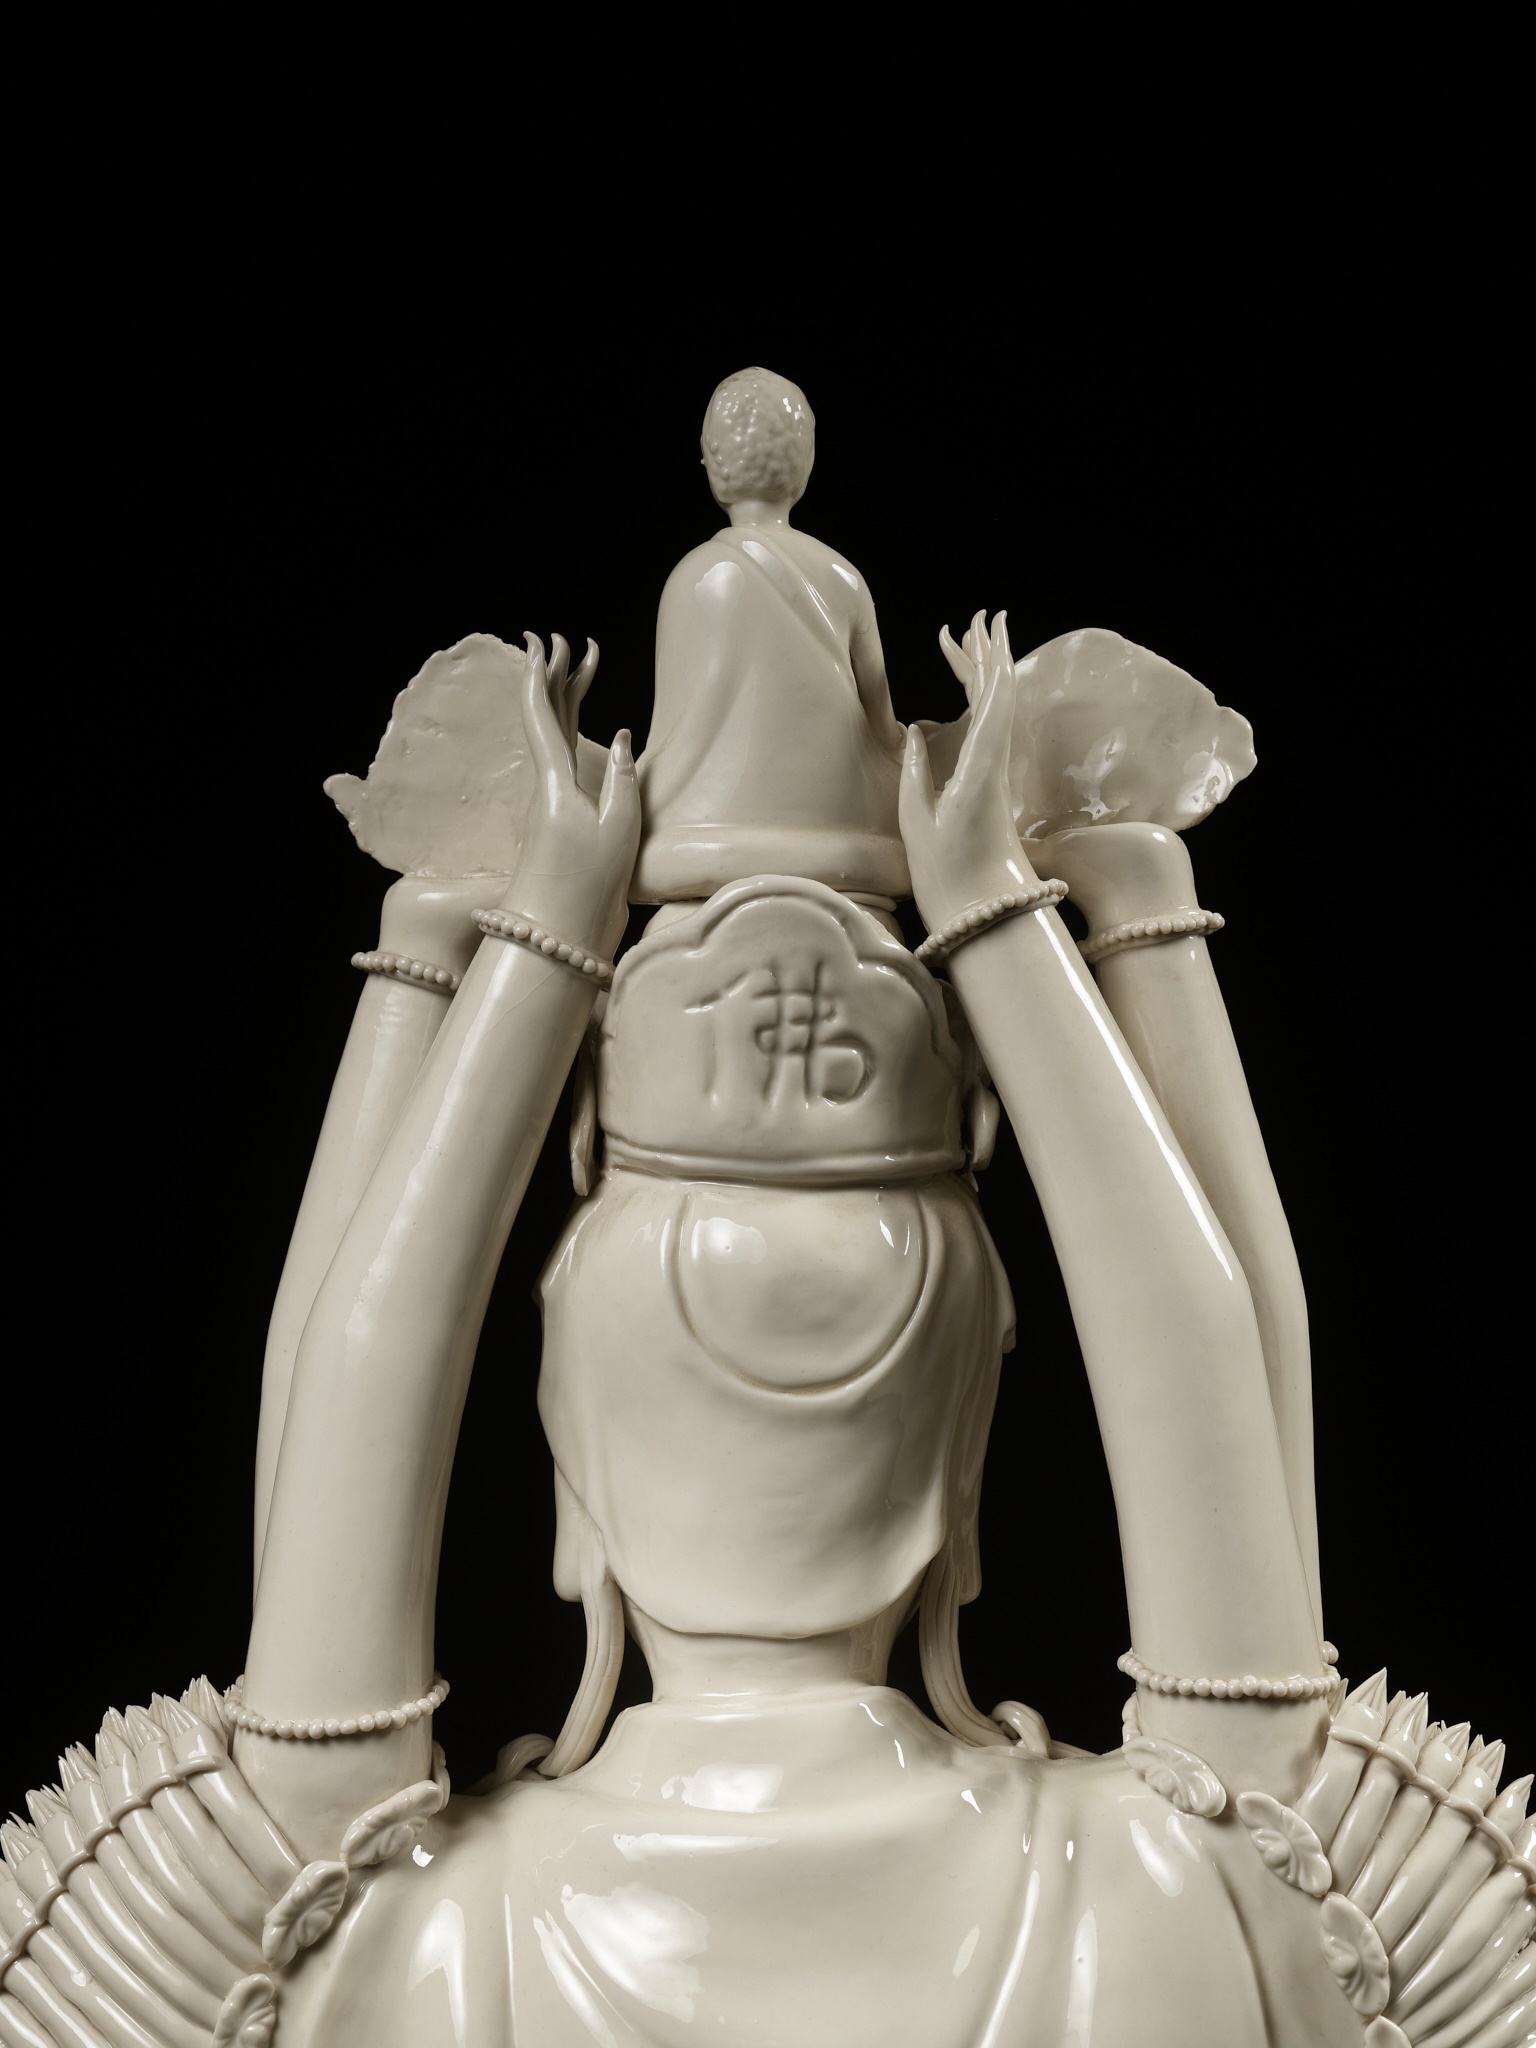 A LARGE DEHUA FIGURE OF THE THOUSAND-ARMED GUANYIN AND THE EIGHT IMMORTALS, LATE QING DYNASTY - Image 16 of 22